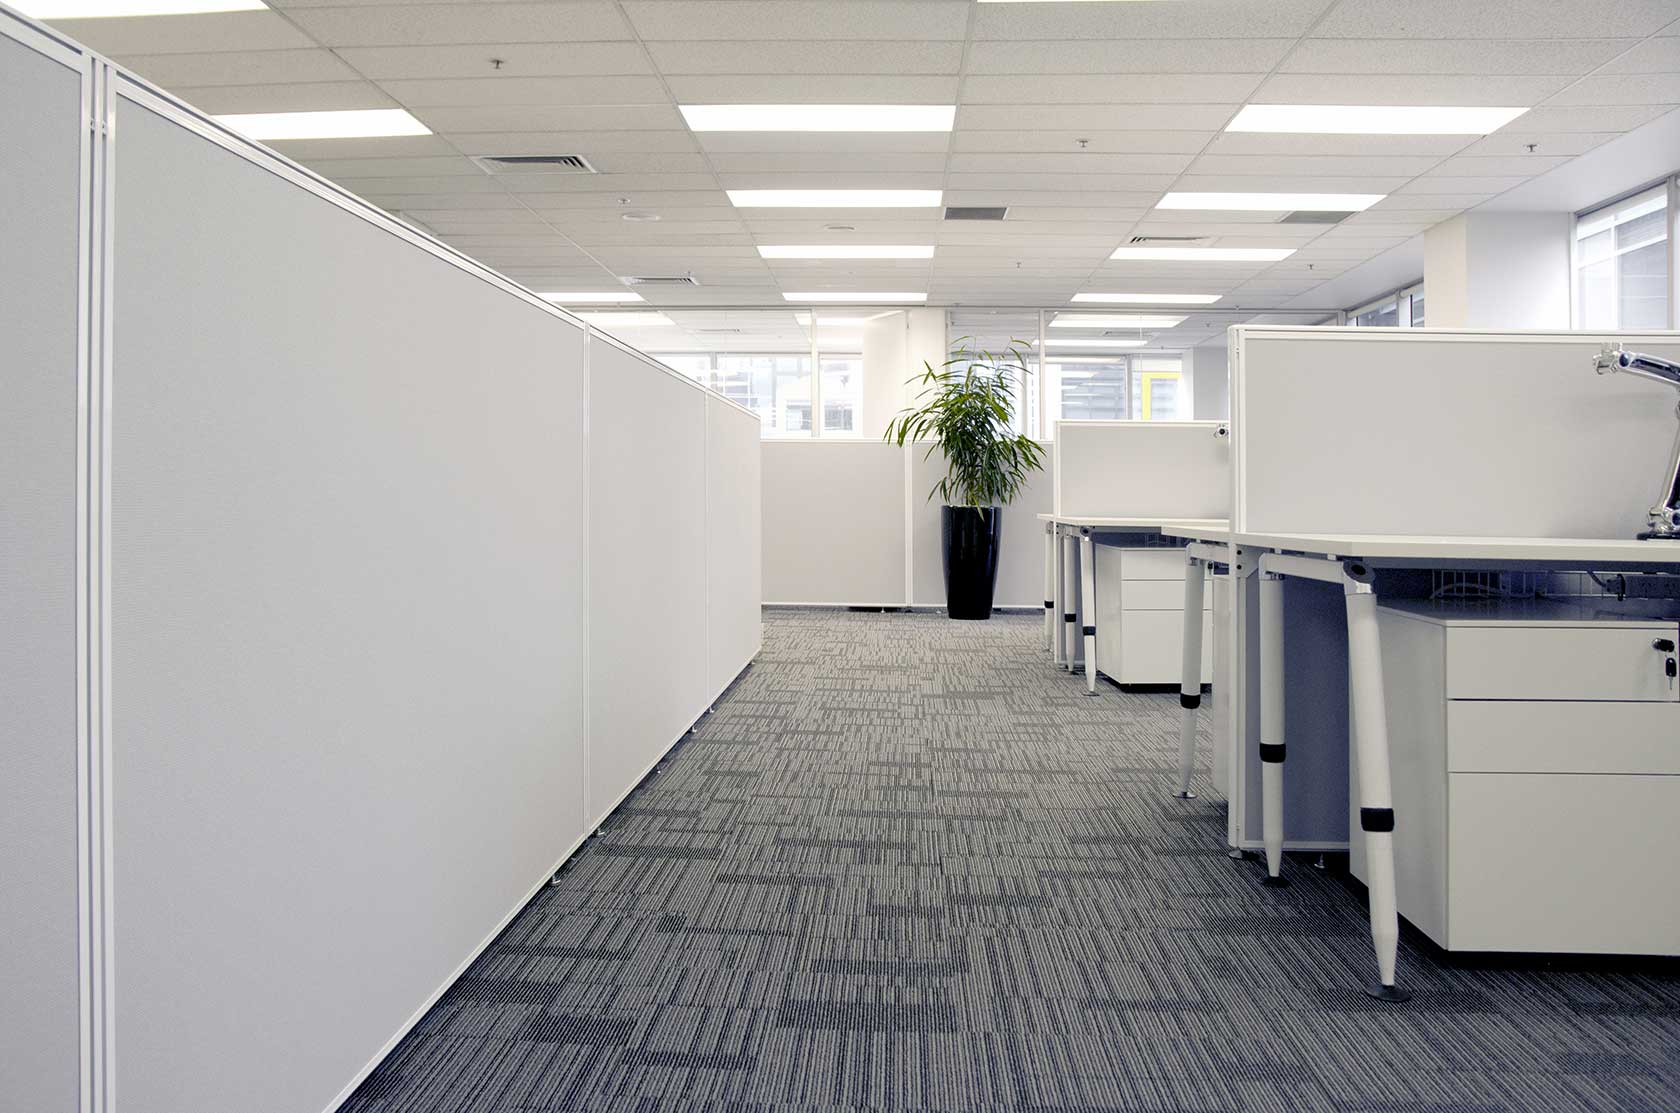 10 Benefits Of Installing Carpet Tiles At Your Office | My Decorative